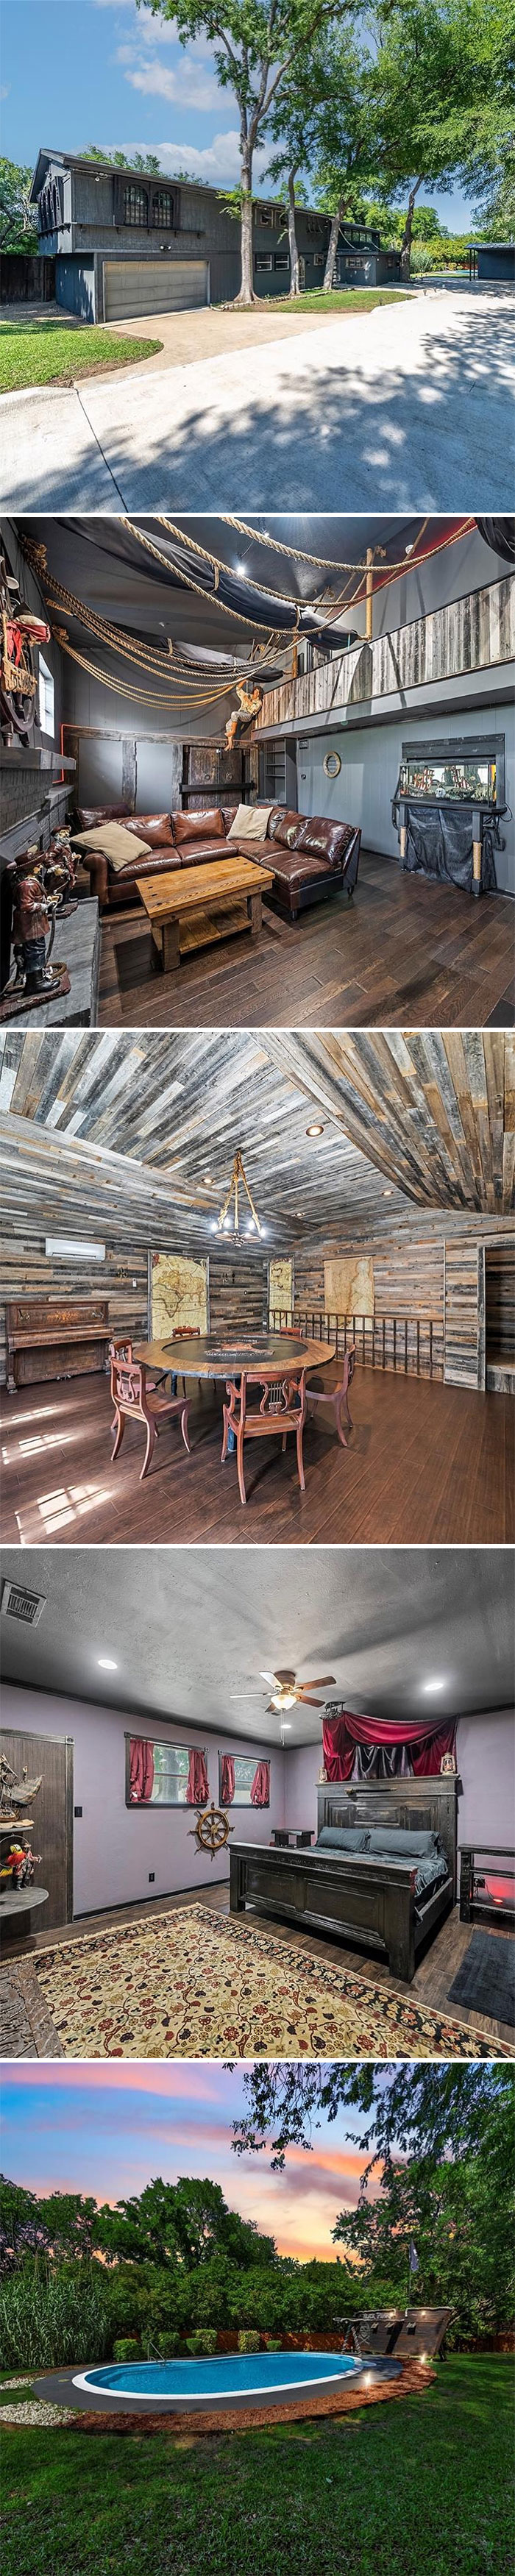 This Plano, Tx Home Is “Themed After A Popular Disney Movie”… Can U Guess Which One? $650,000